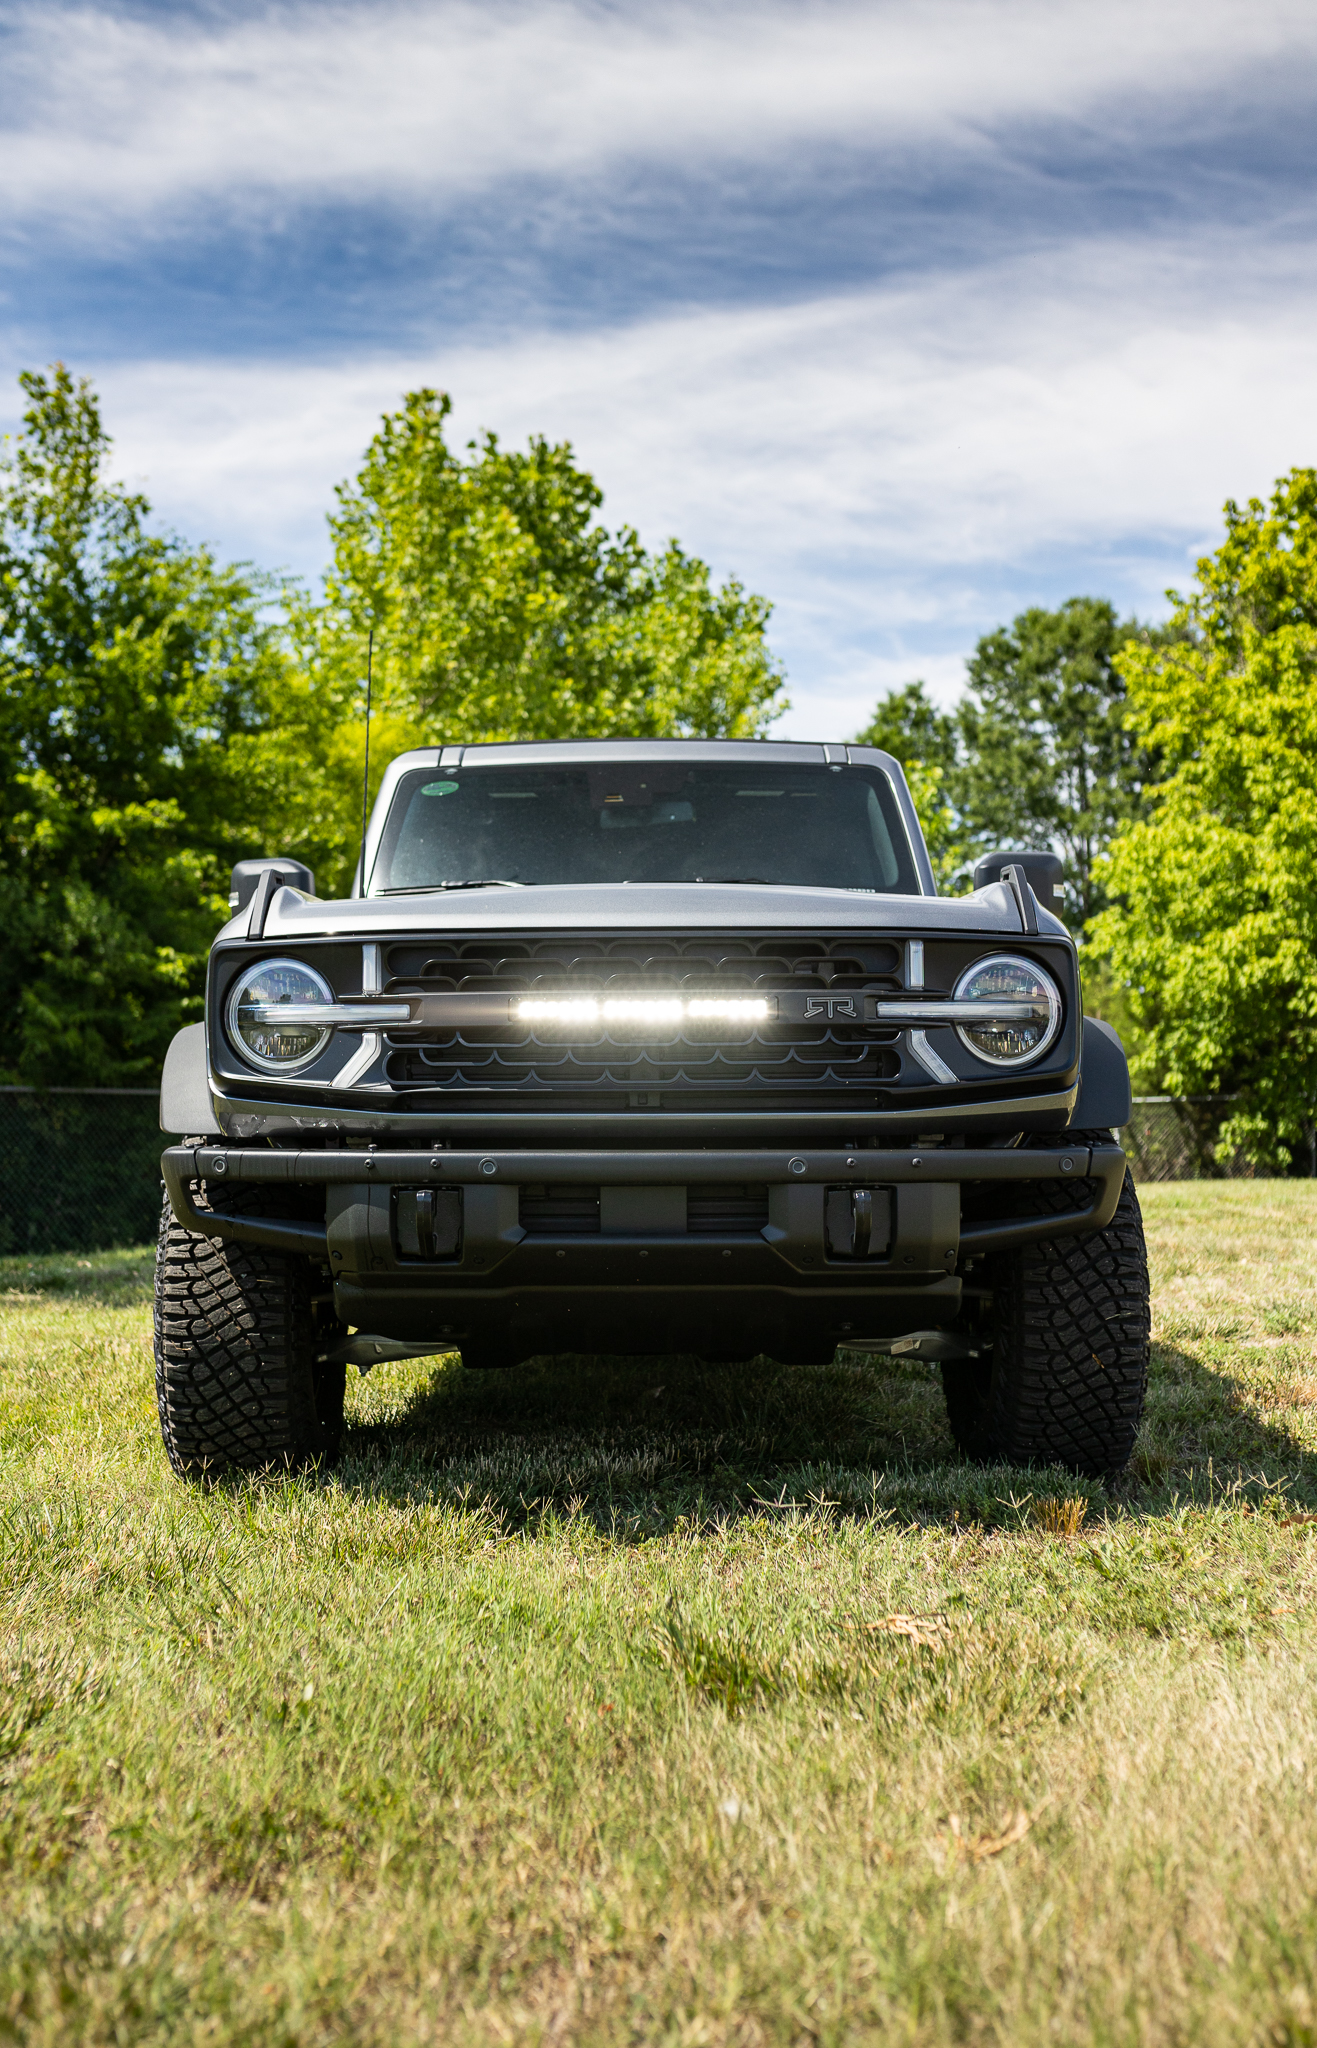 Ford Bronco Lighting Options from RTR Vehicles 8F5A9300